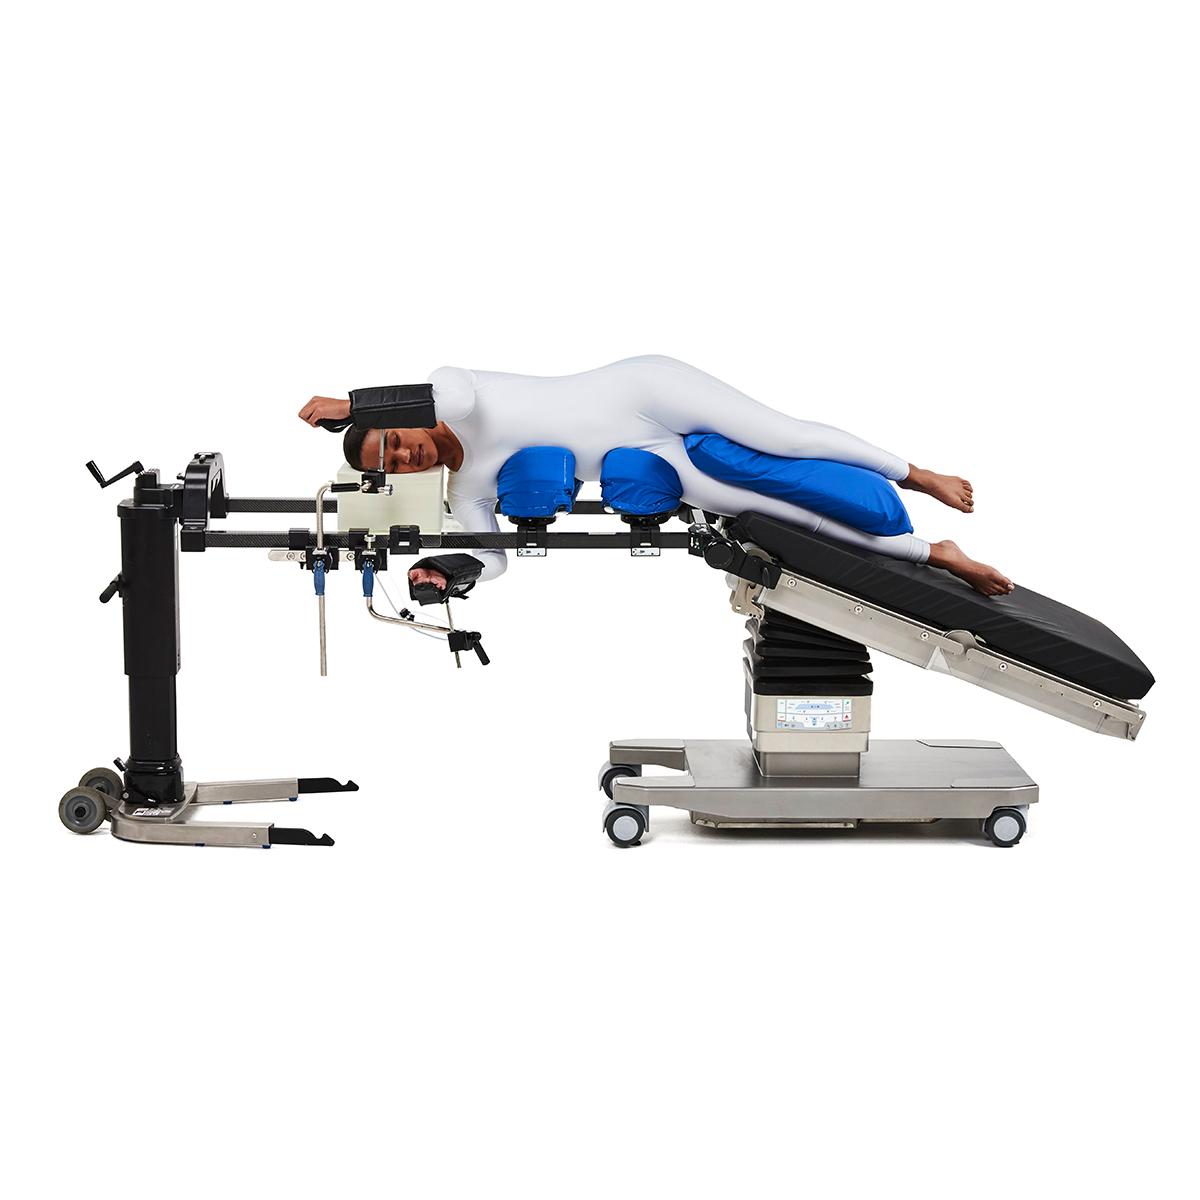 Patient in the lateral position on Hillrom surgical table equipped with Universal Spine Frame accessories.